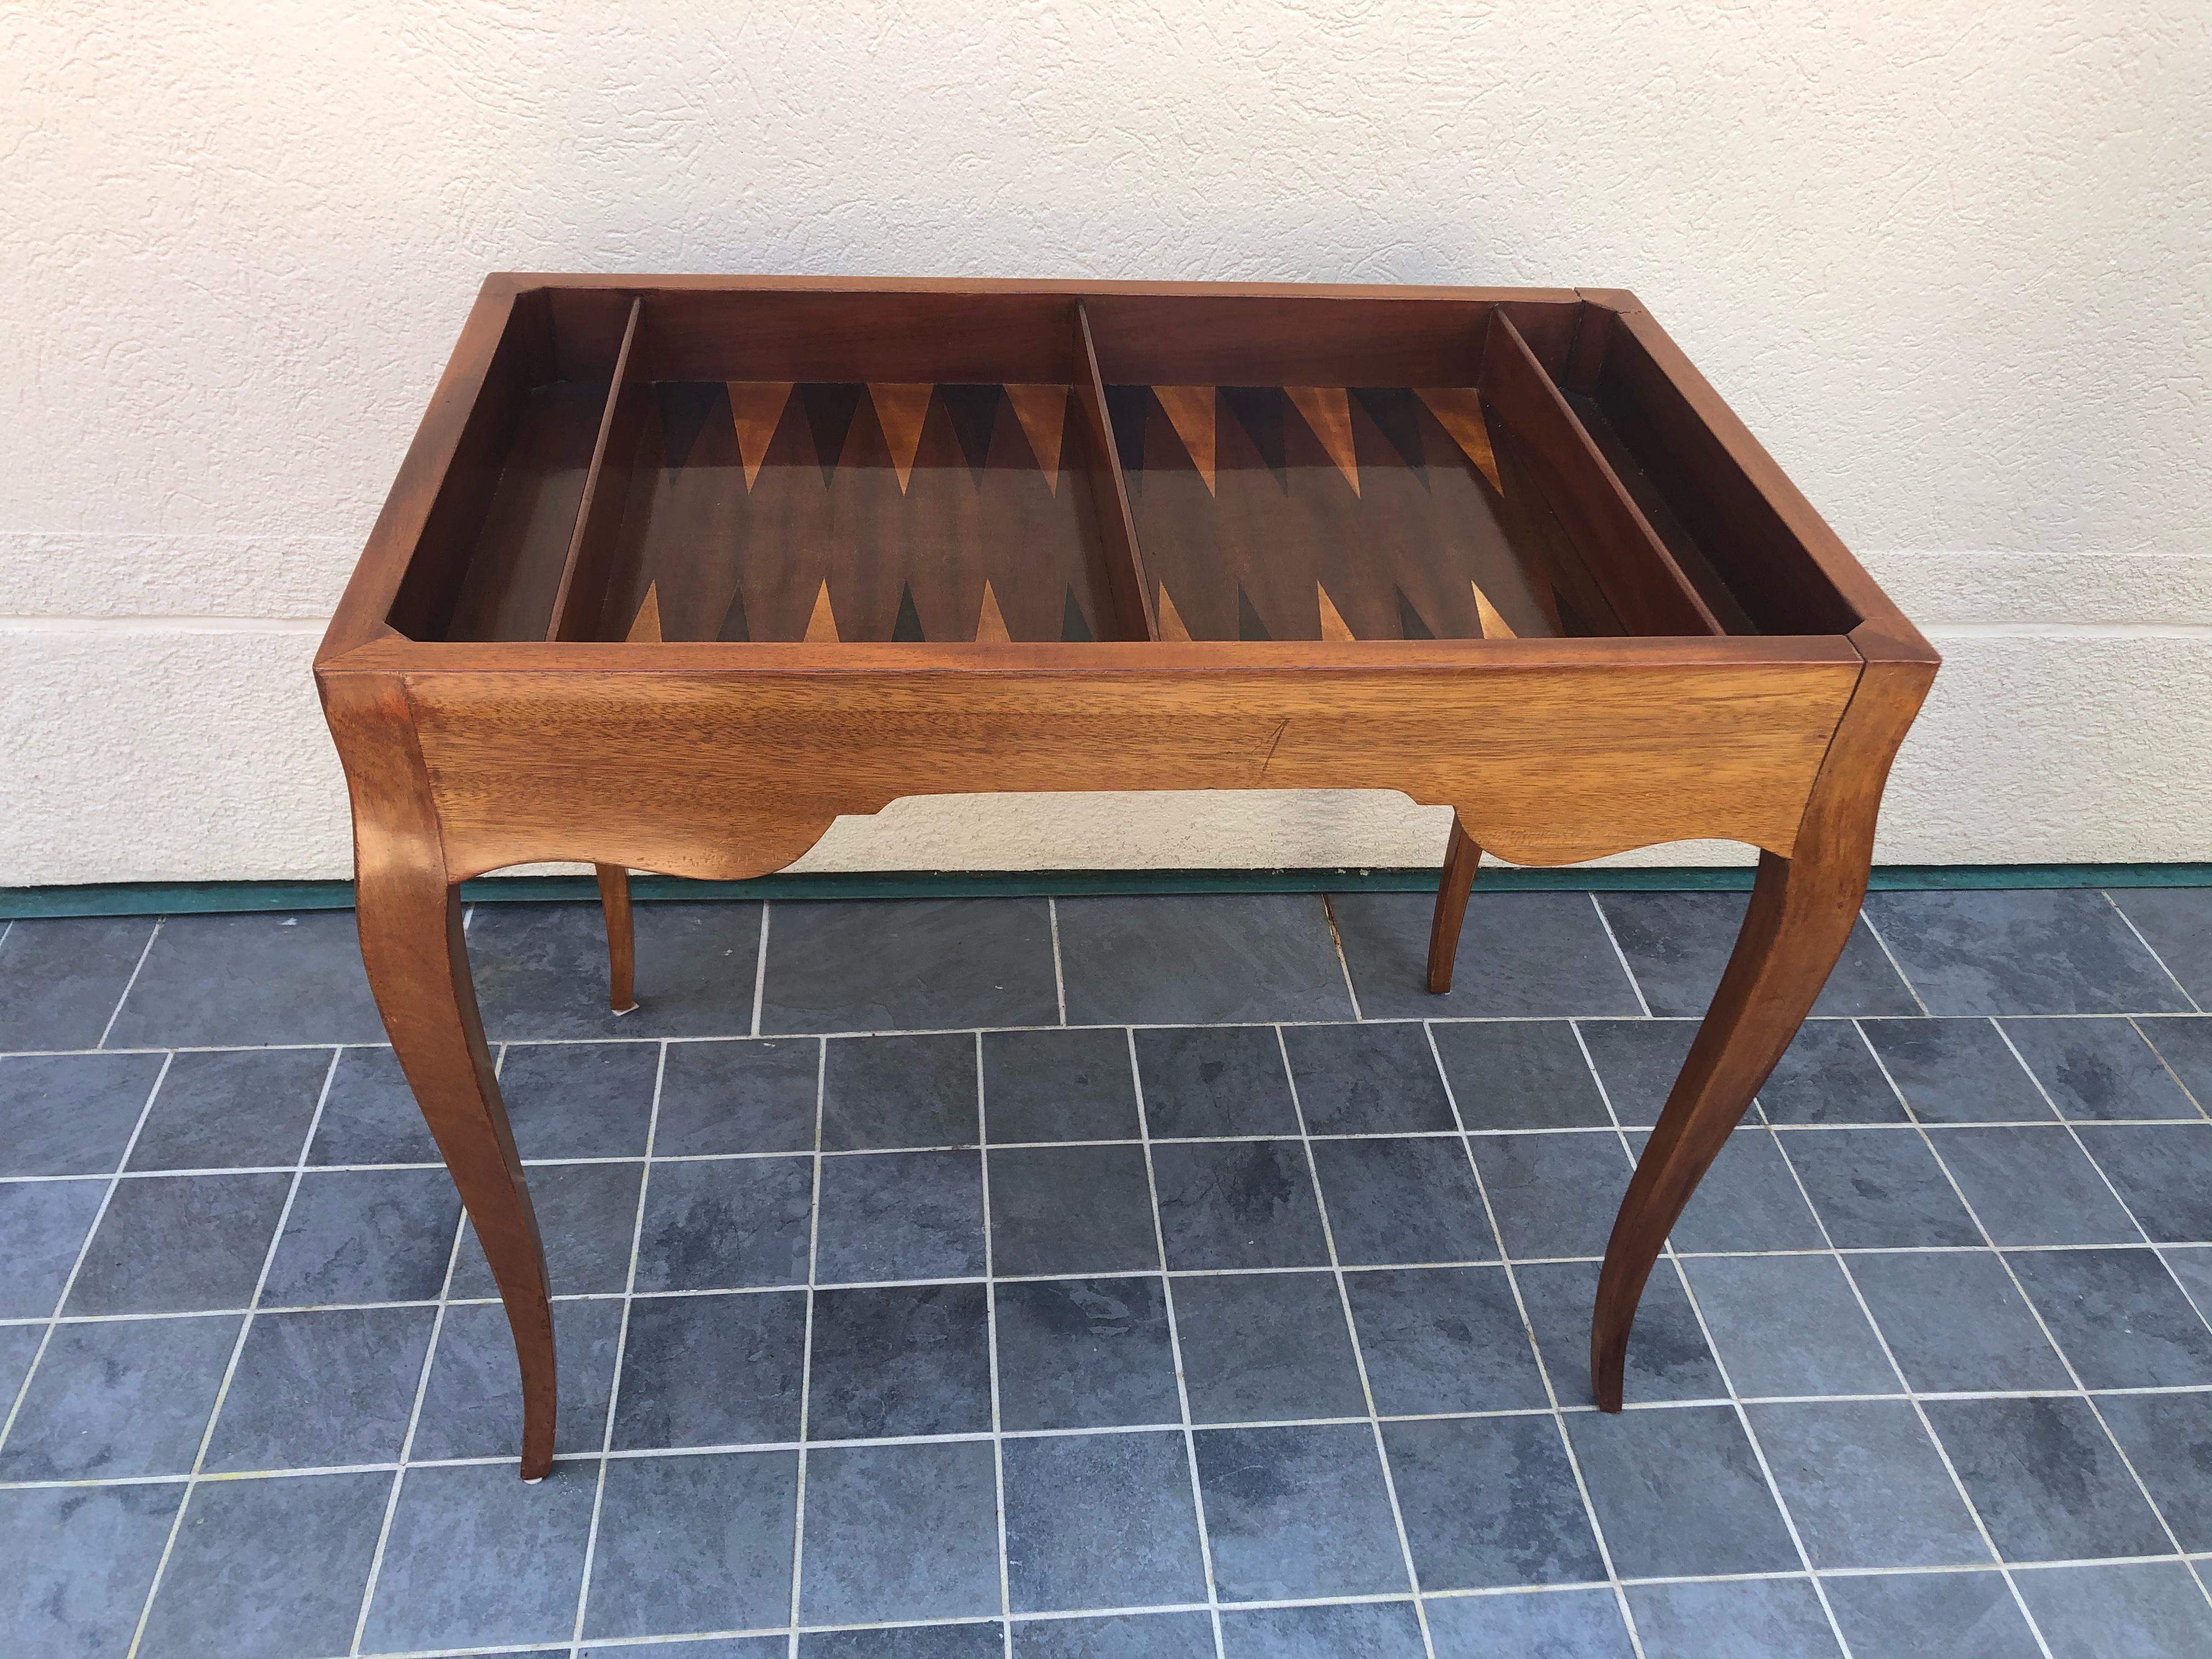 Fabulous game table crafted from a mix of woods in a rich walnut finish. Table features a chess or checkers inlay on a removable top and a backgammon board on the interior. It also has a green felt top for playing cards. The top has a raised edge on